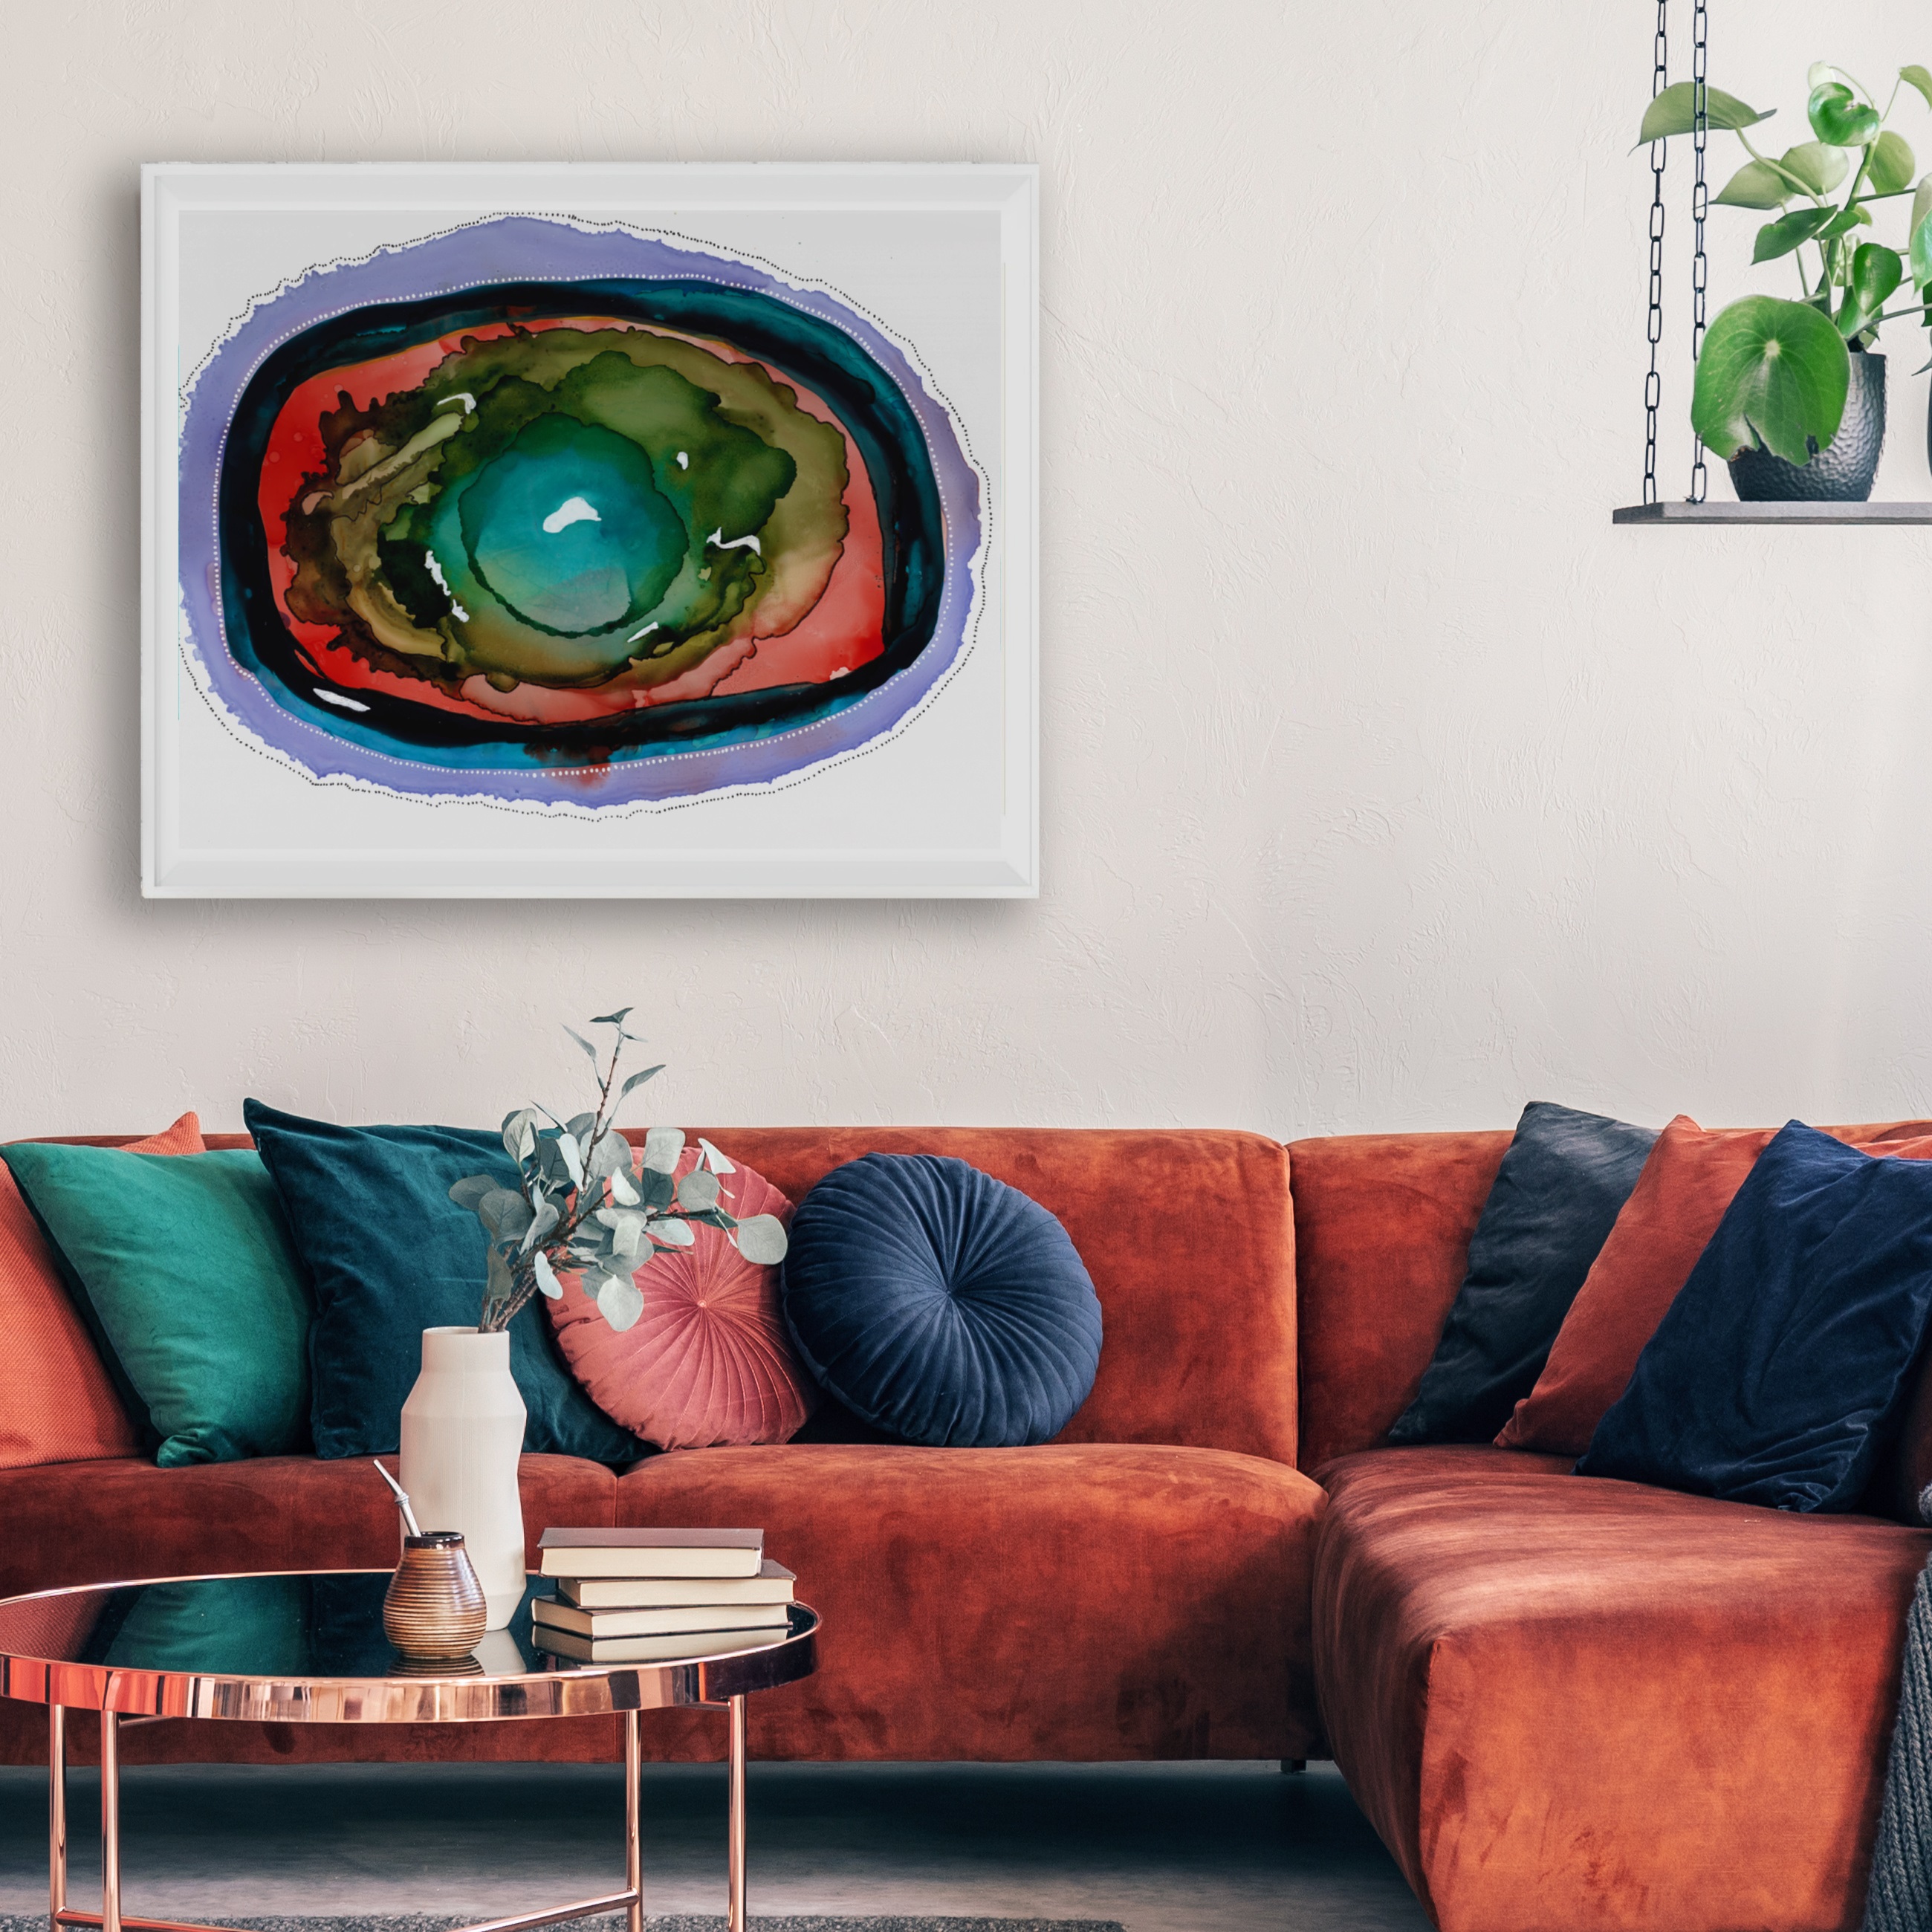 How to Choose Art for Your Home